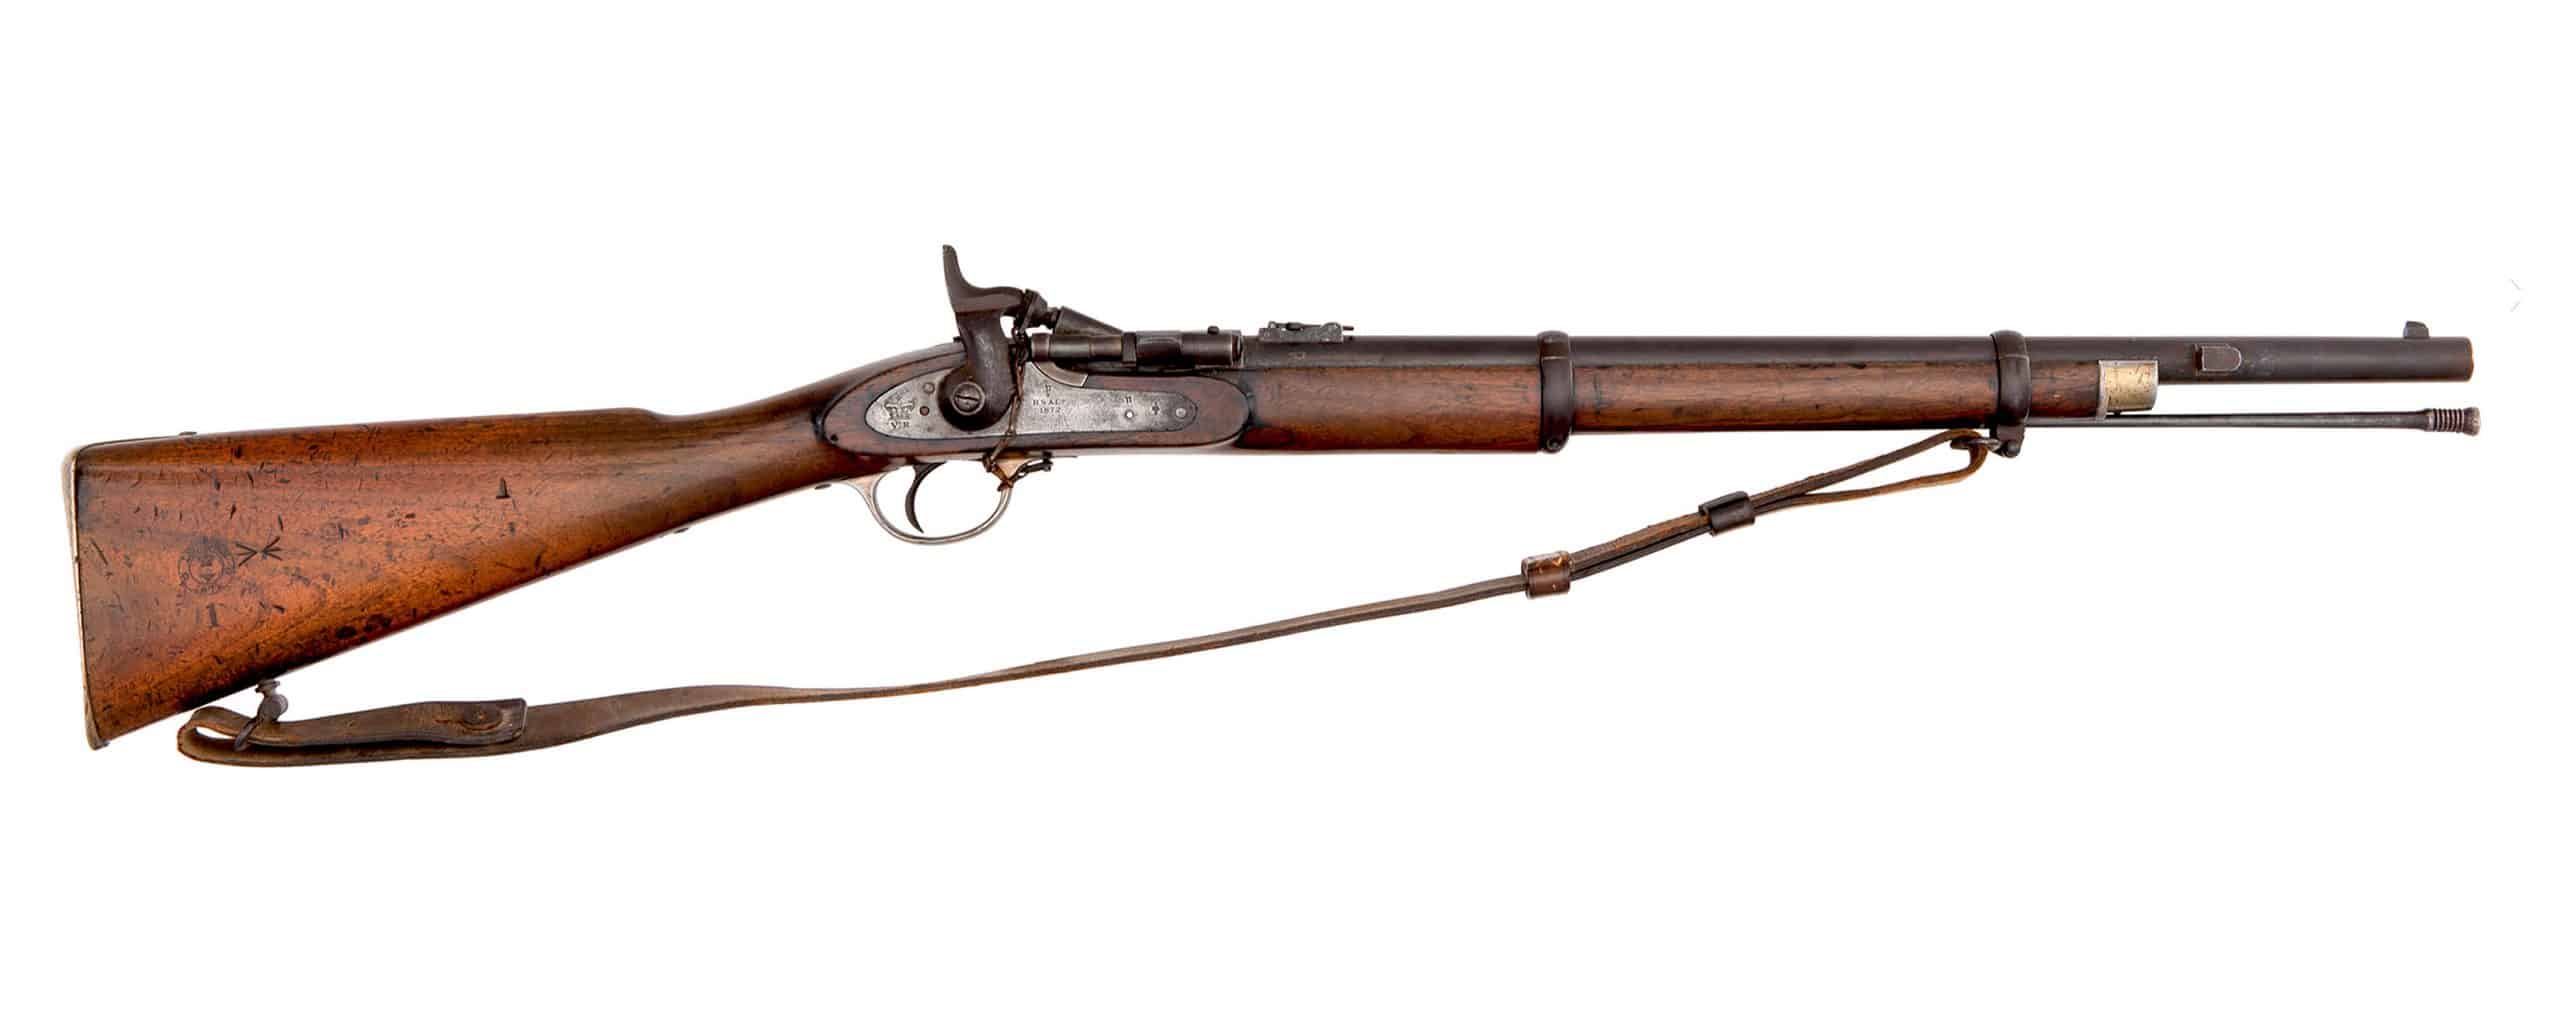 Rifles-1871-Snider-Enfield-MKII-Artillery-Carbine-scaled